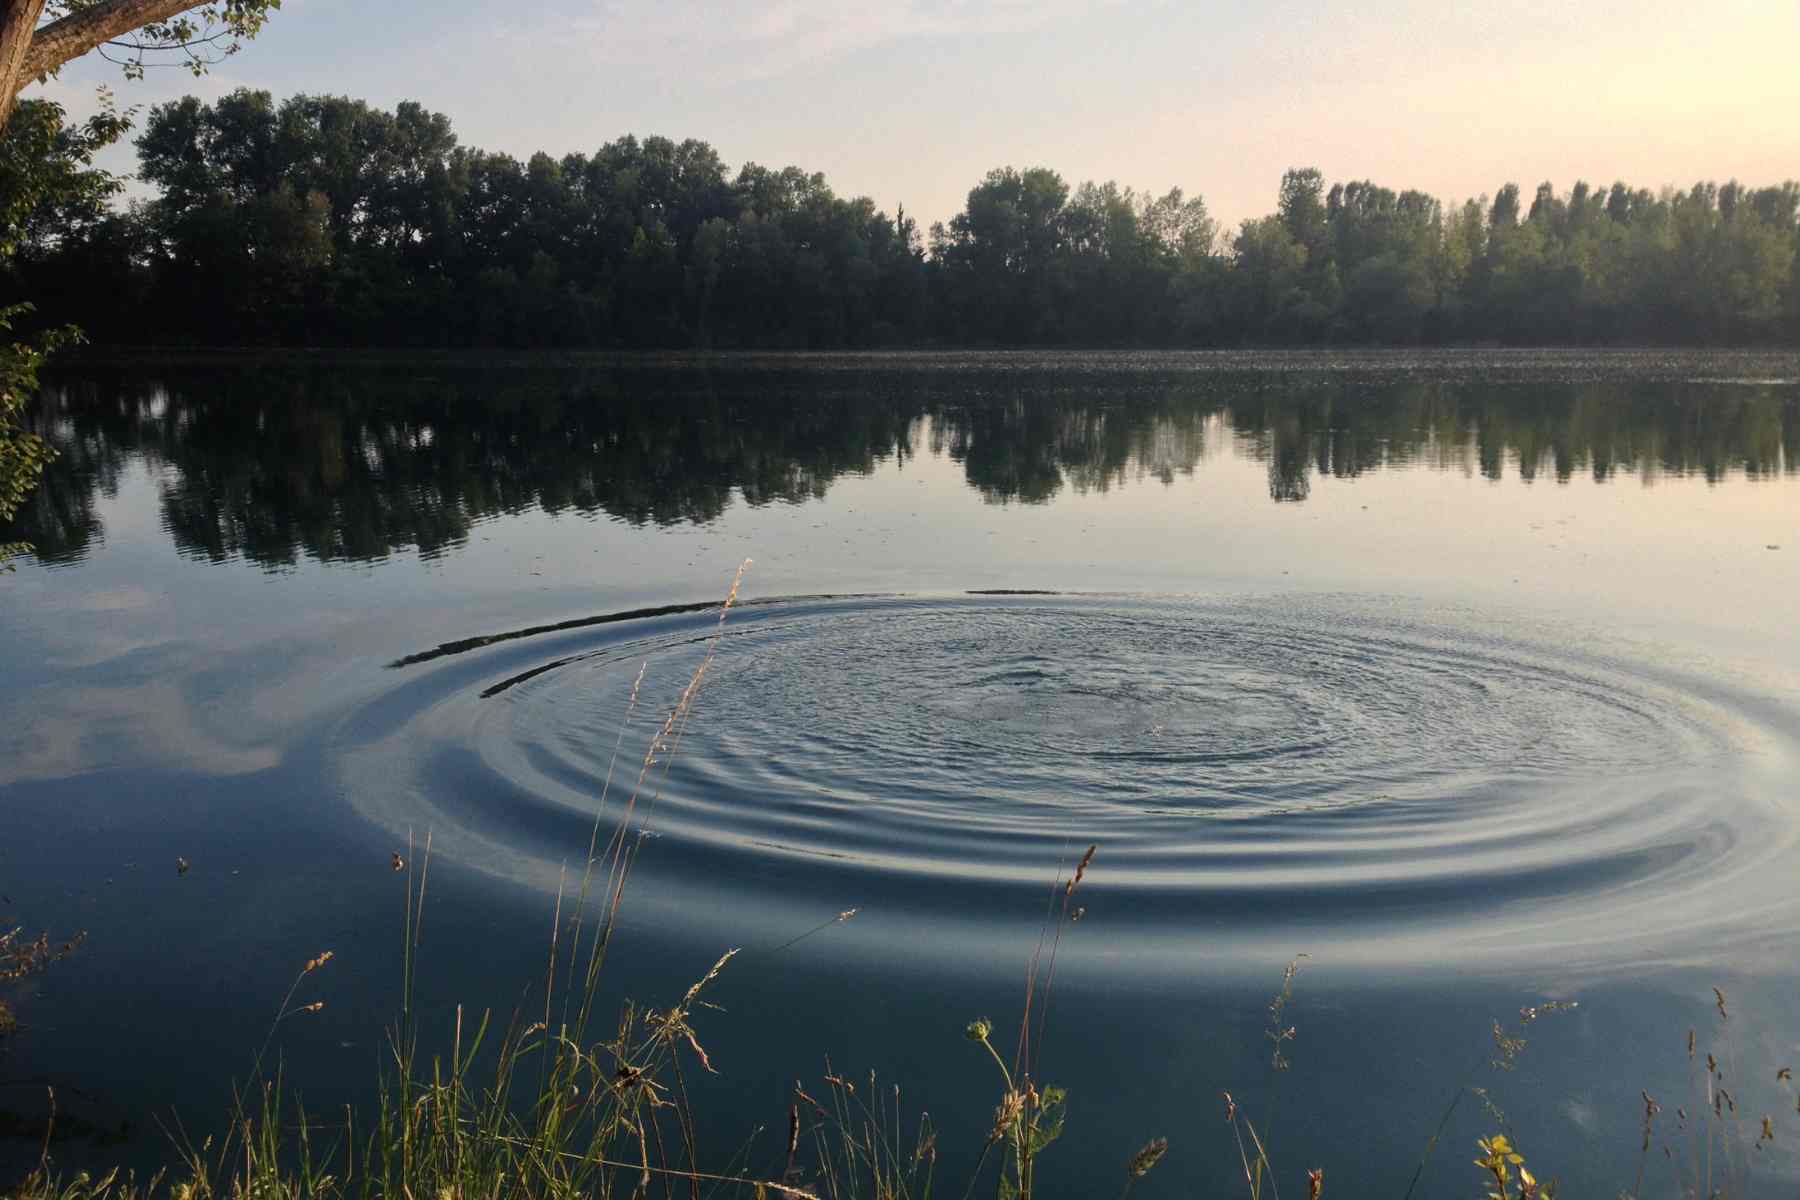 Ripples in the water